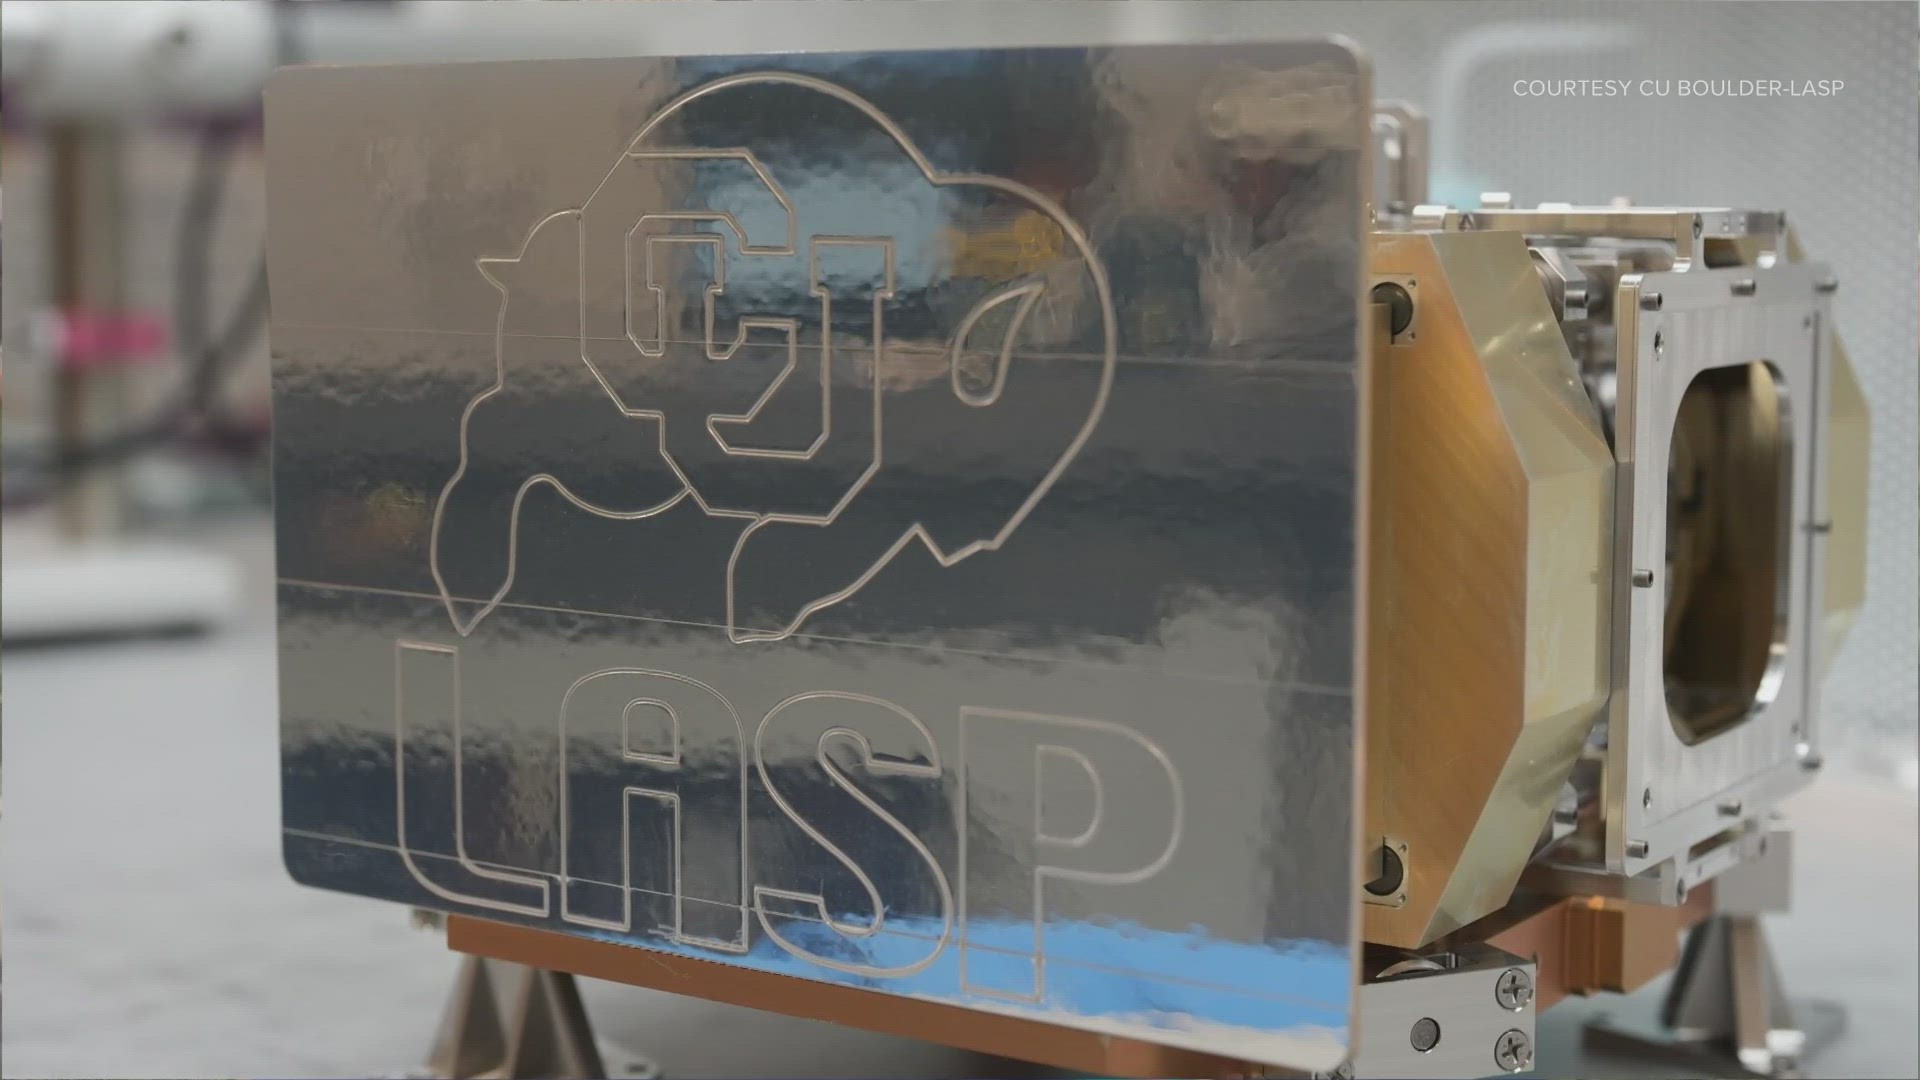 CU Boulder's Laboratory for Space and Physics has been etching the Ralphie logo onto instruments headed for space for more than 30 years.